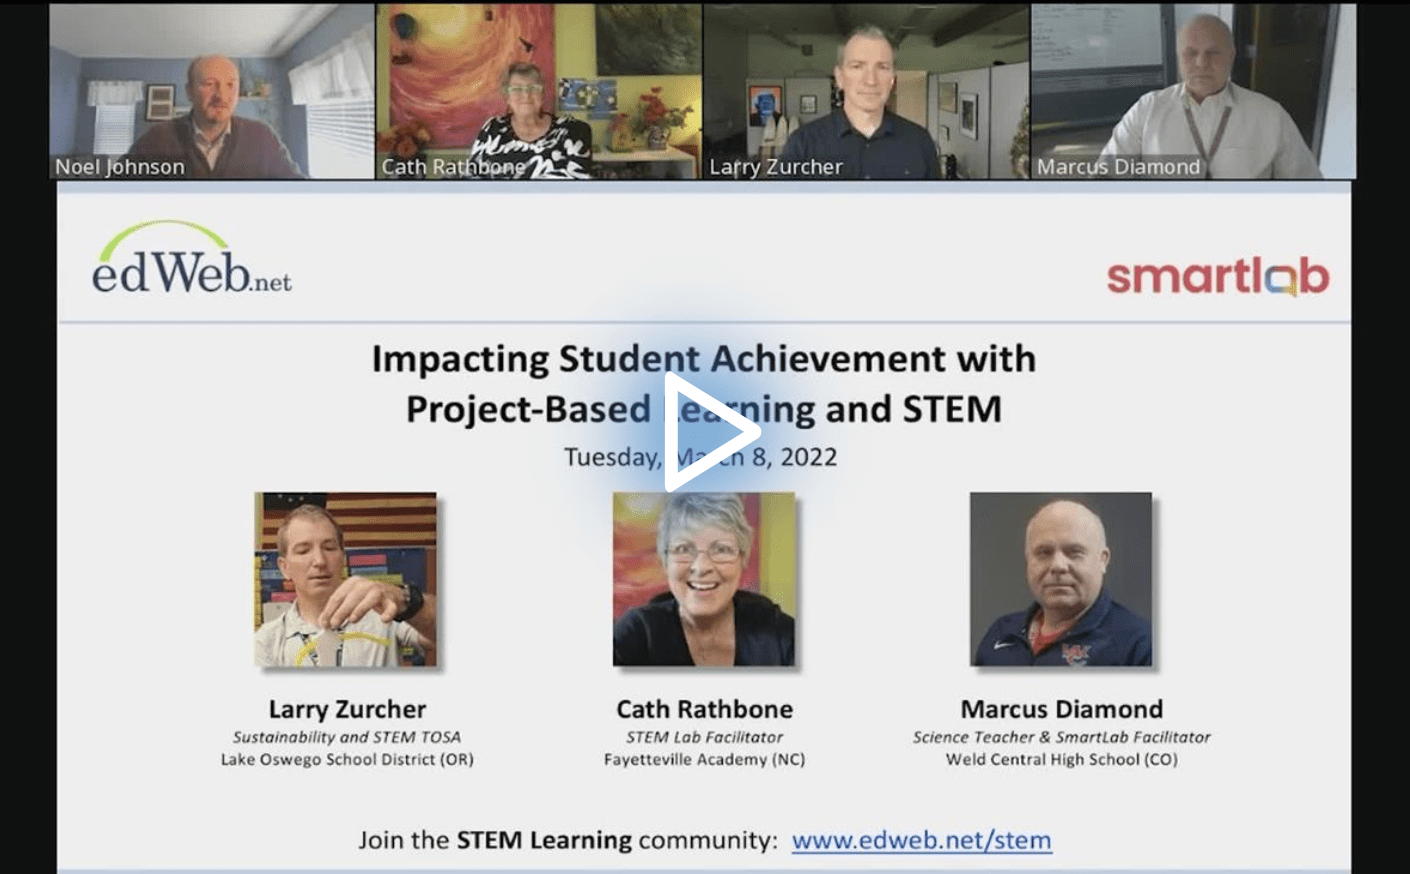 Impacting Student Achievement with Project-Based Learning and STEM edLeader Panel recording link